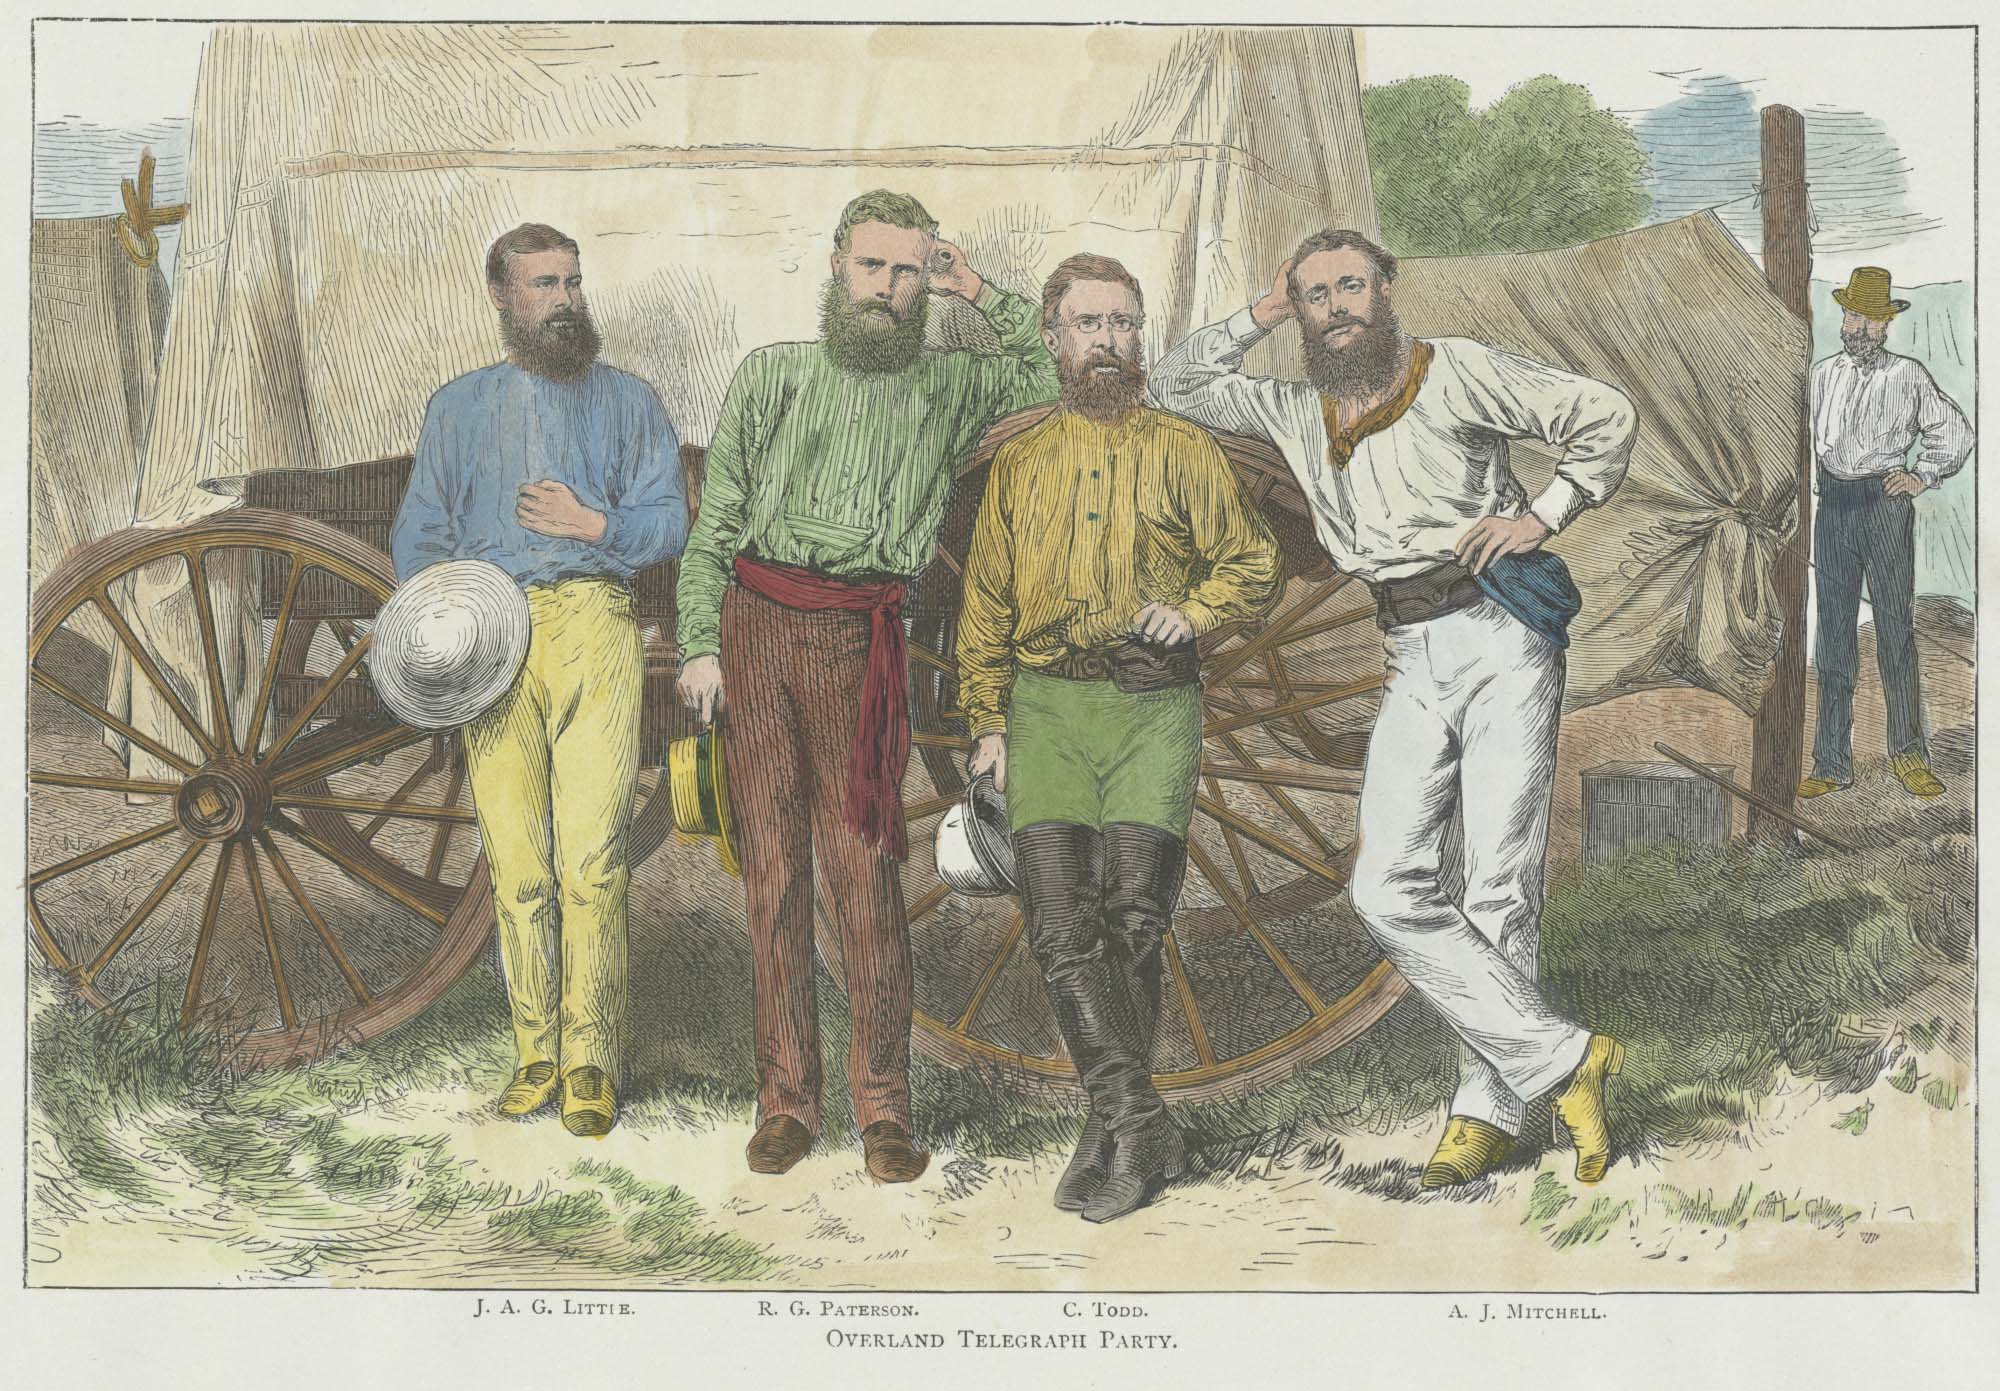 A group of Overland Telegraph line workers.